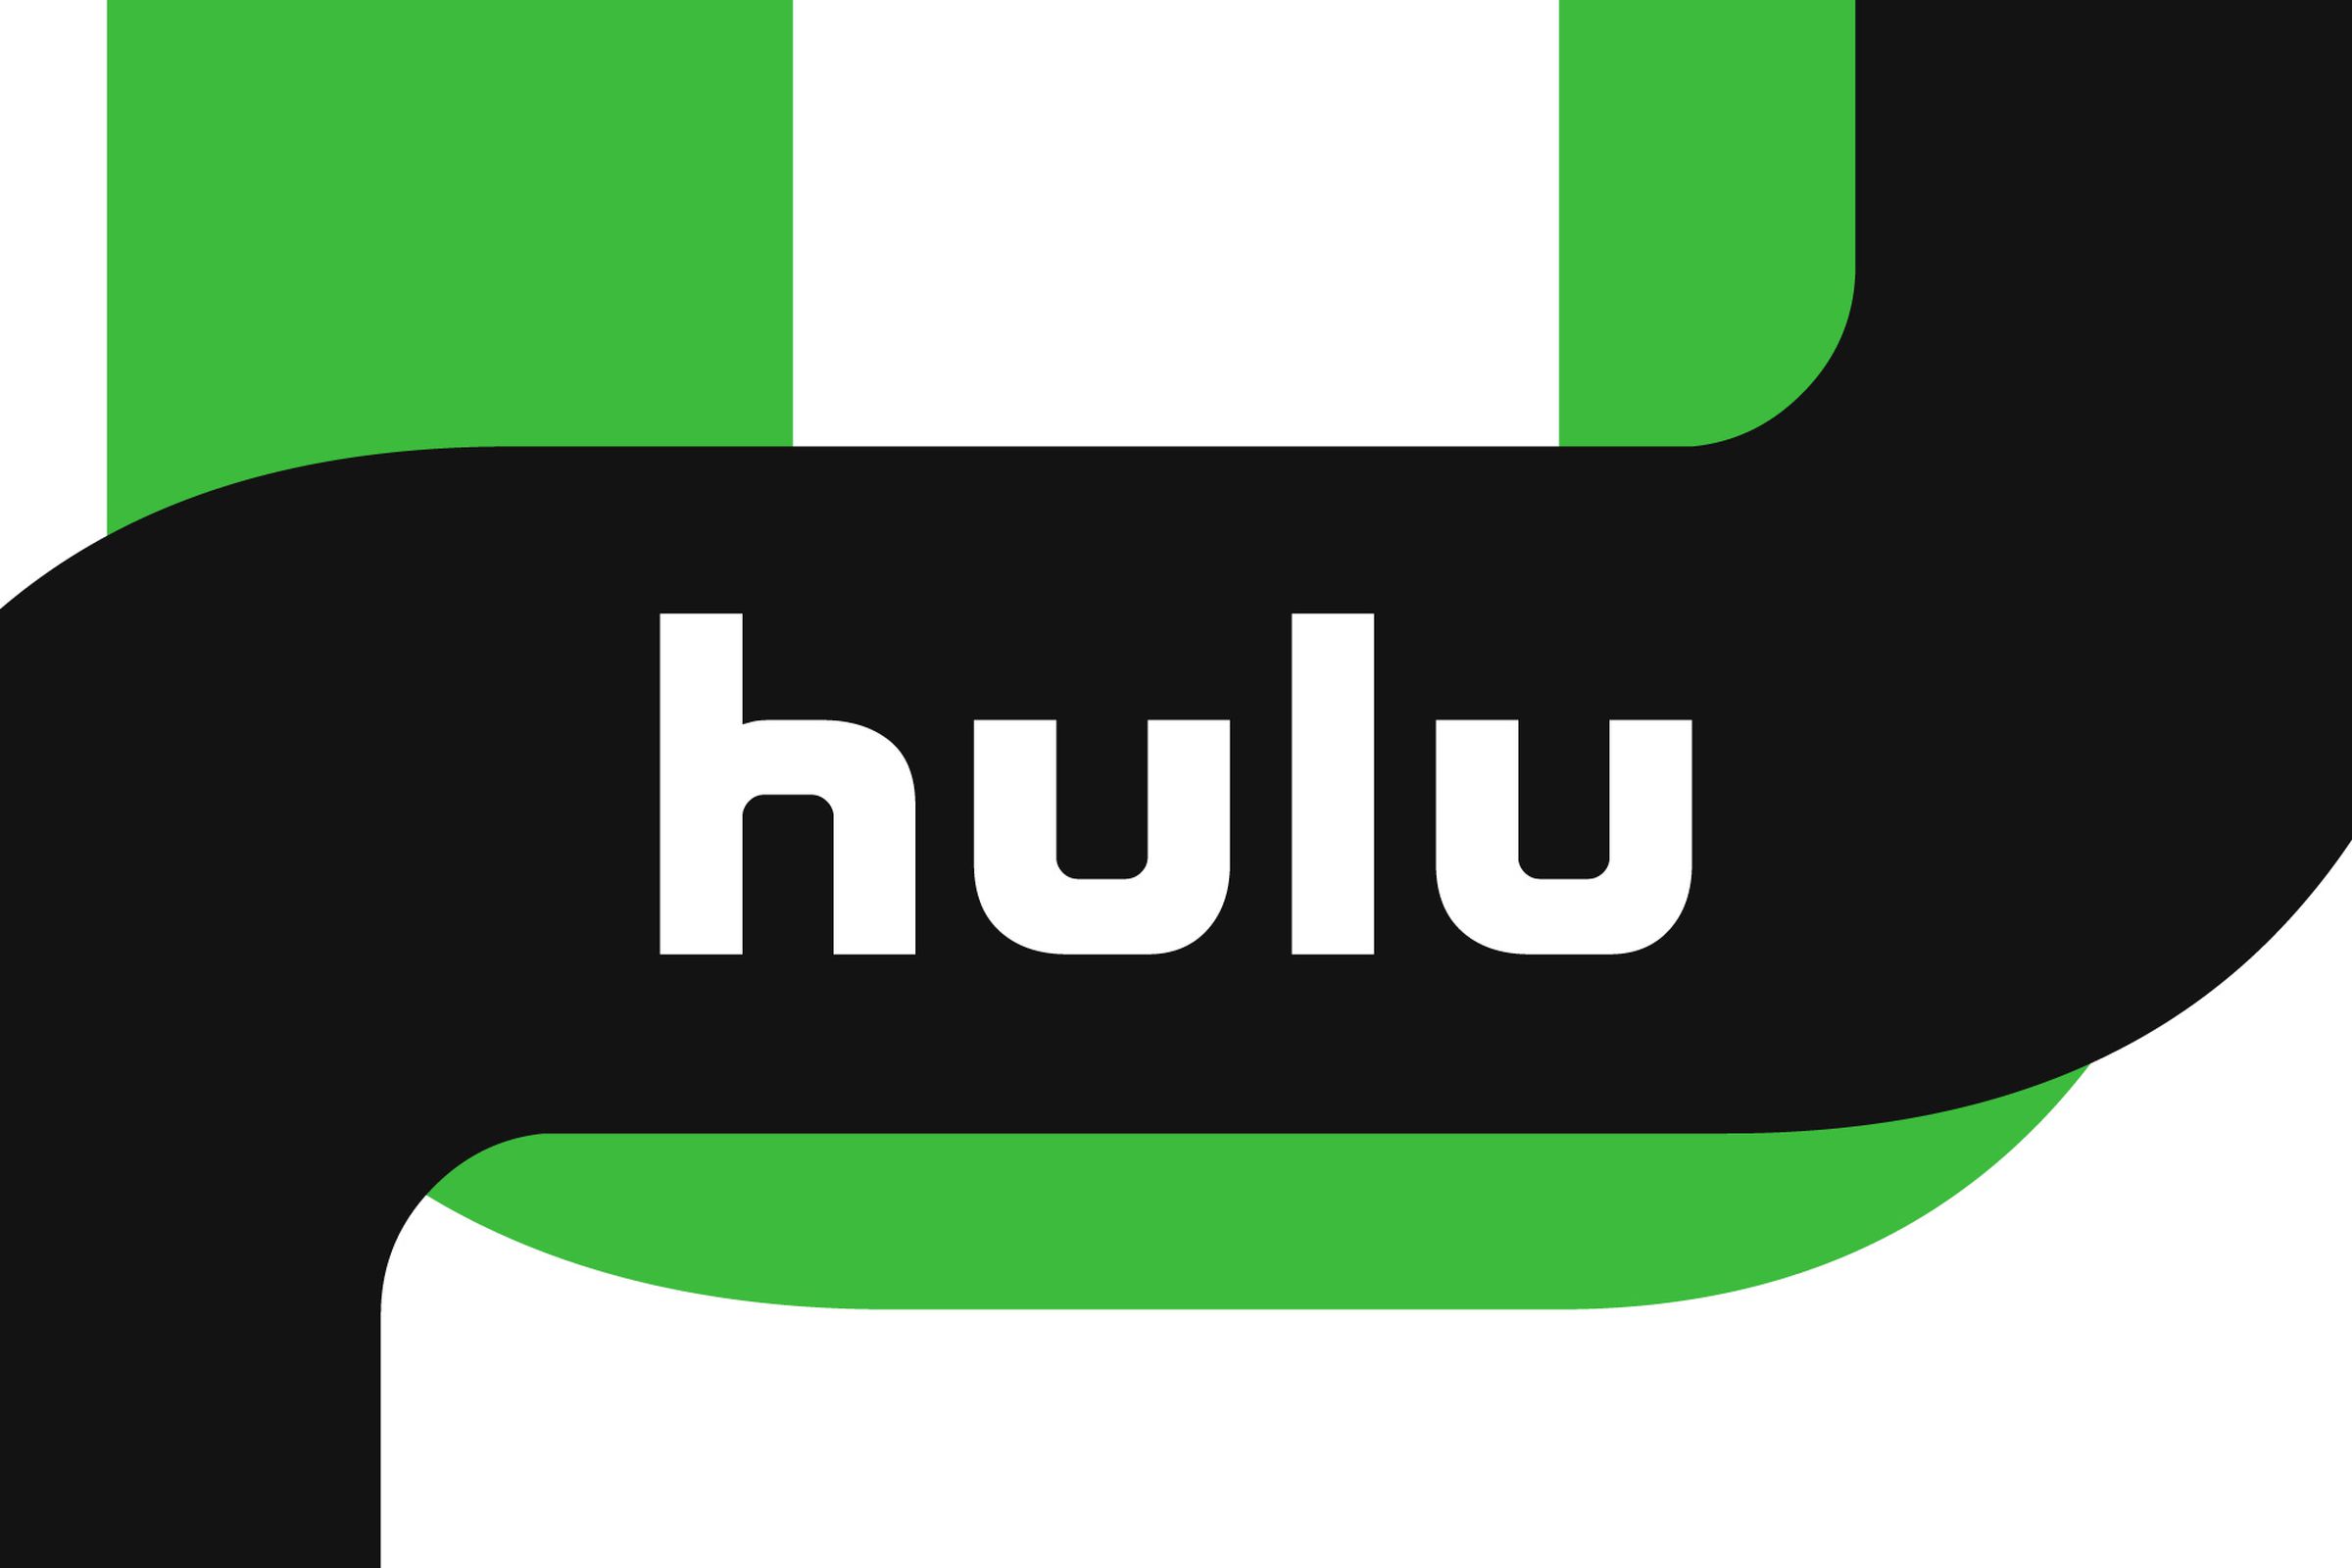 These Black Friday streaming deals on Hulu, HBO Max, Paramount Plus, and more are still going